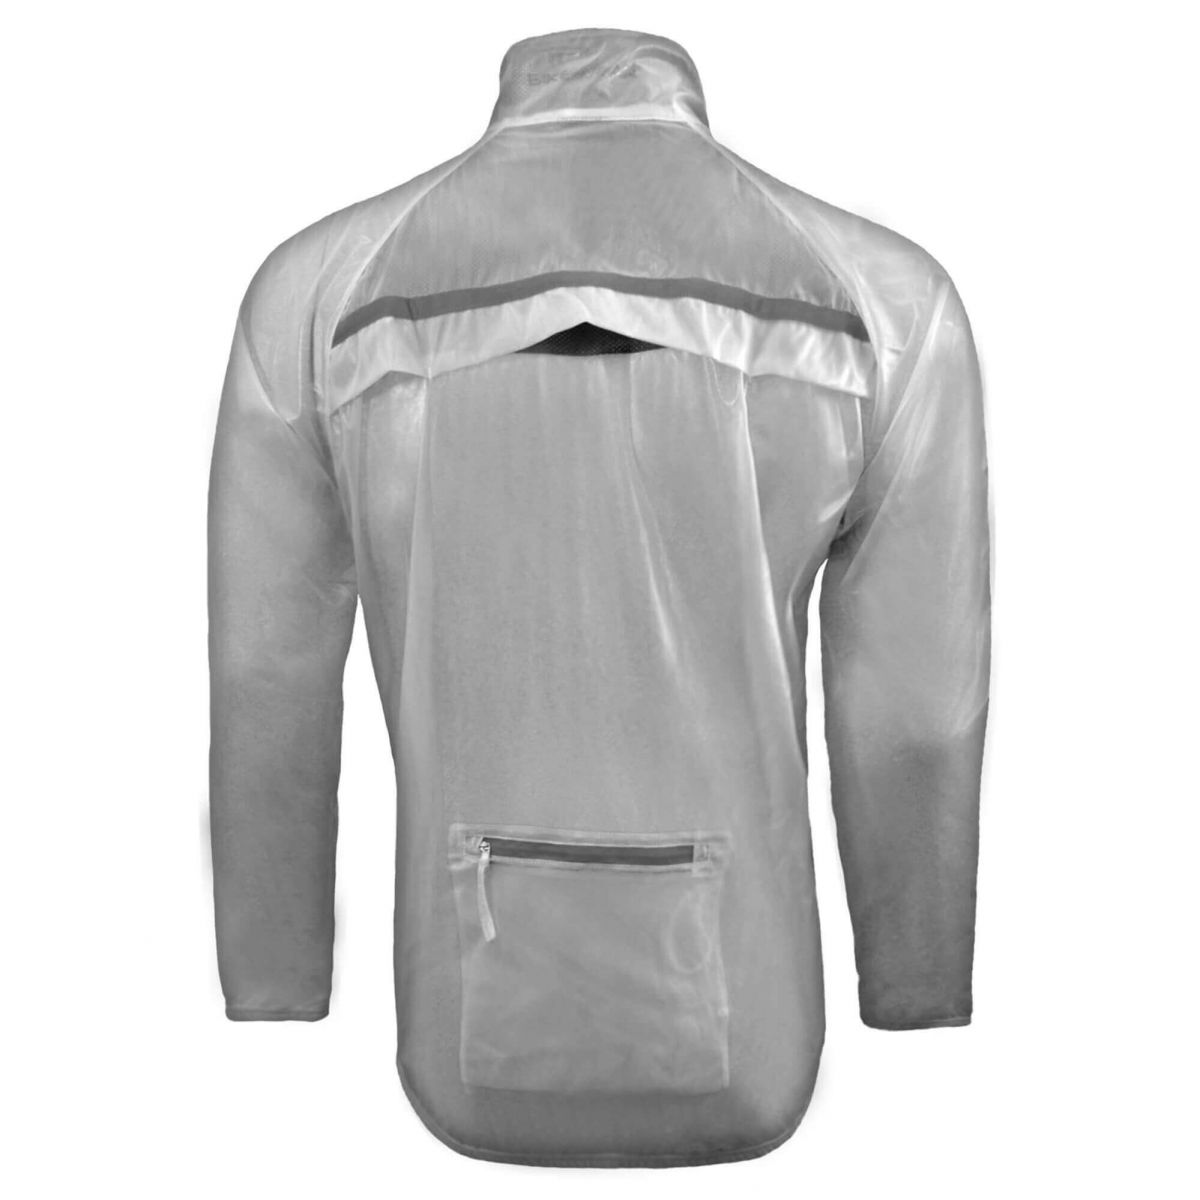 Campera Impermeable Ciclismo Funkier Lecco